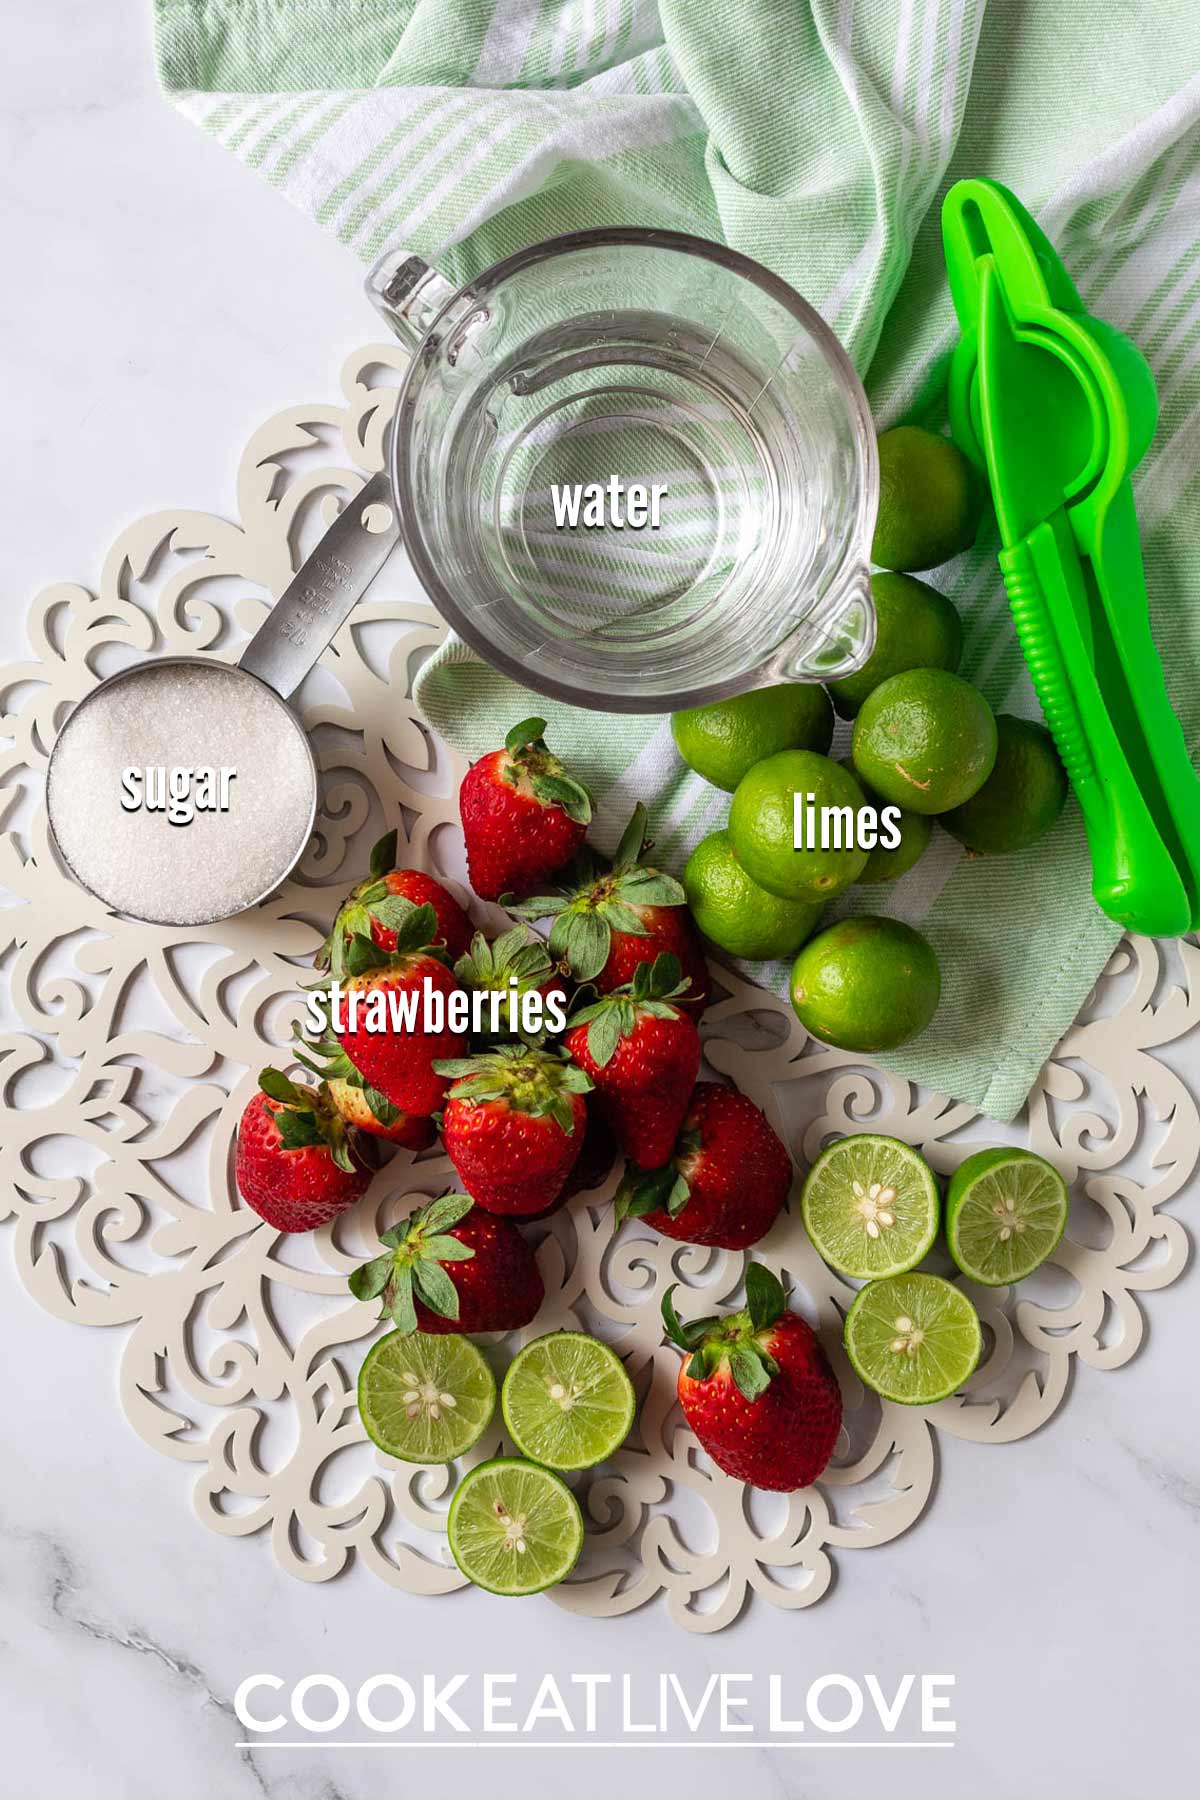 Ingredients to make strawberry limeade on the table.